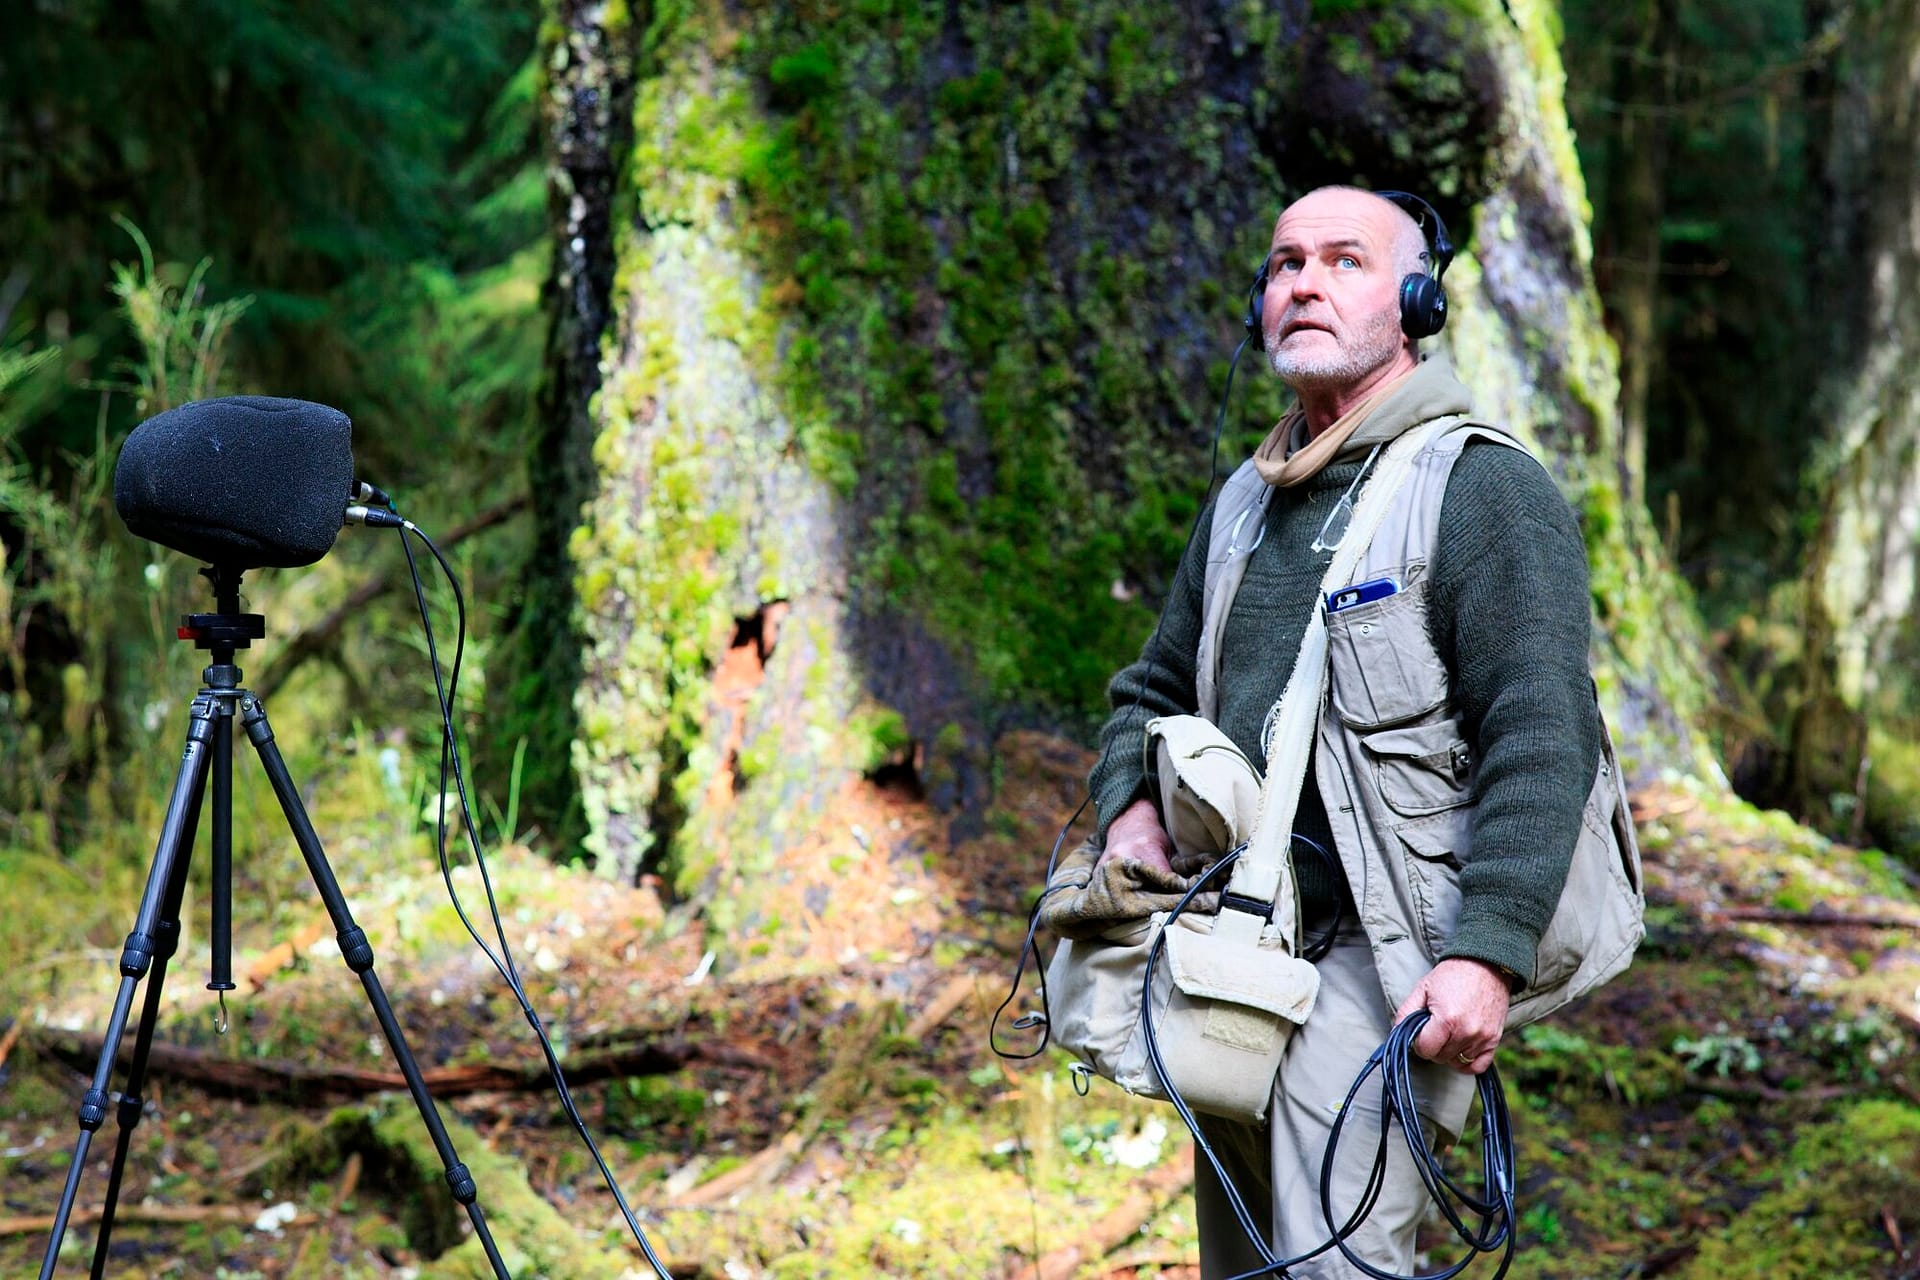 Image: Gordon Hempton staring off into the Hoh Rainforest wearing headphones with a recording apparatus in front of him